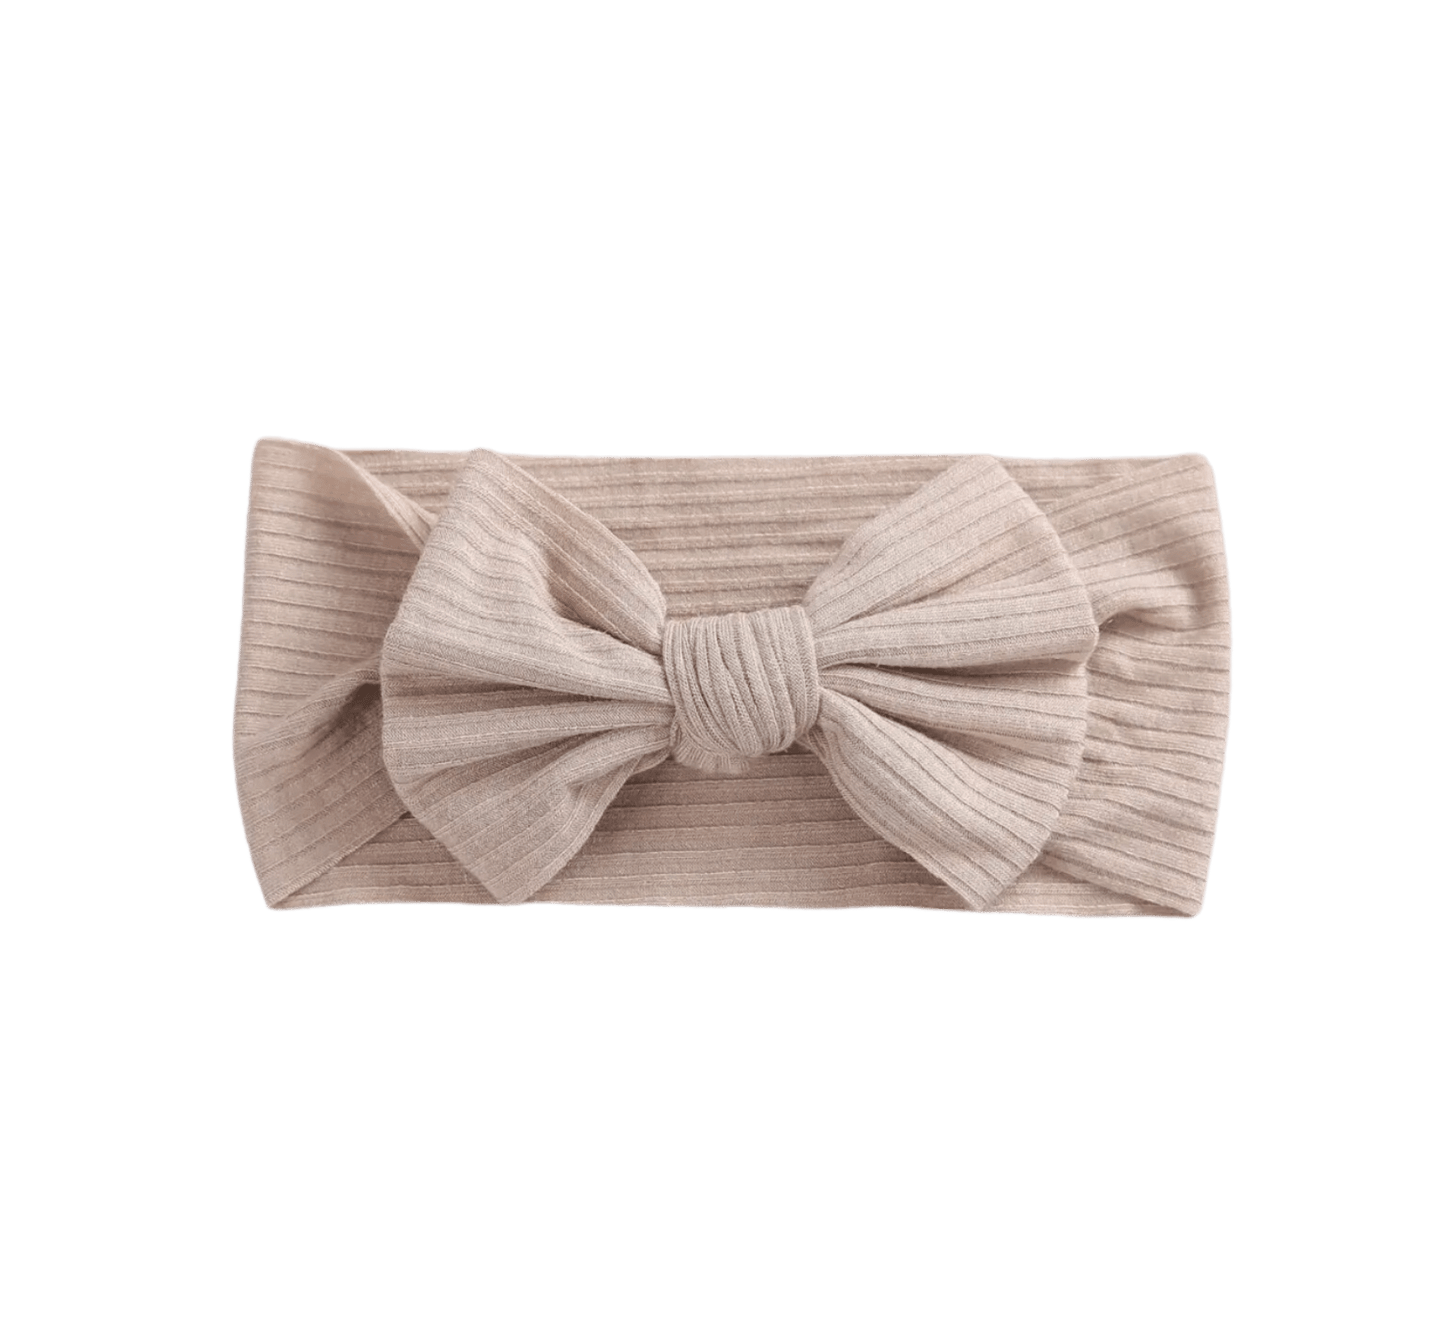 Stylish ribbed bow headwrap in natural color - adorable baby girl accessory by Bowy Lou.